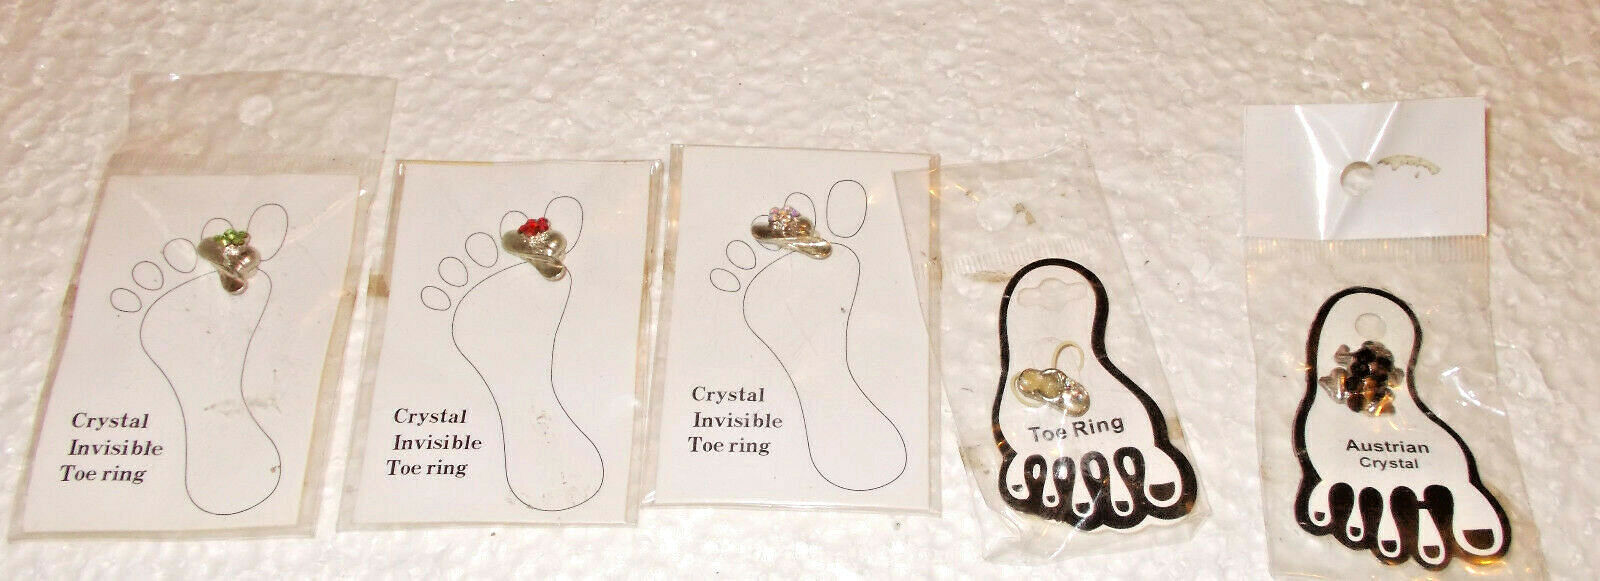 (5) TOE RINGS, Crystal Invisible & Austrian Crystal/ New